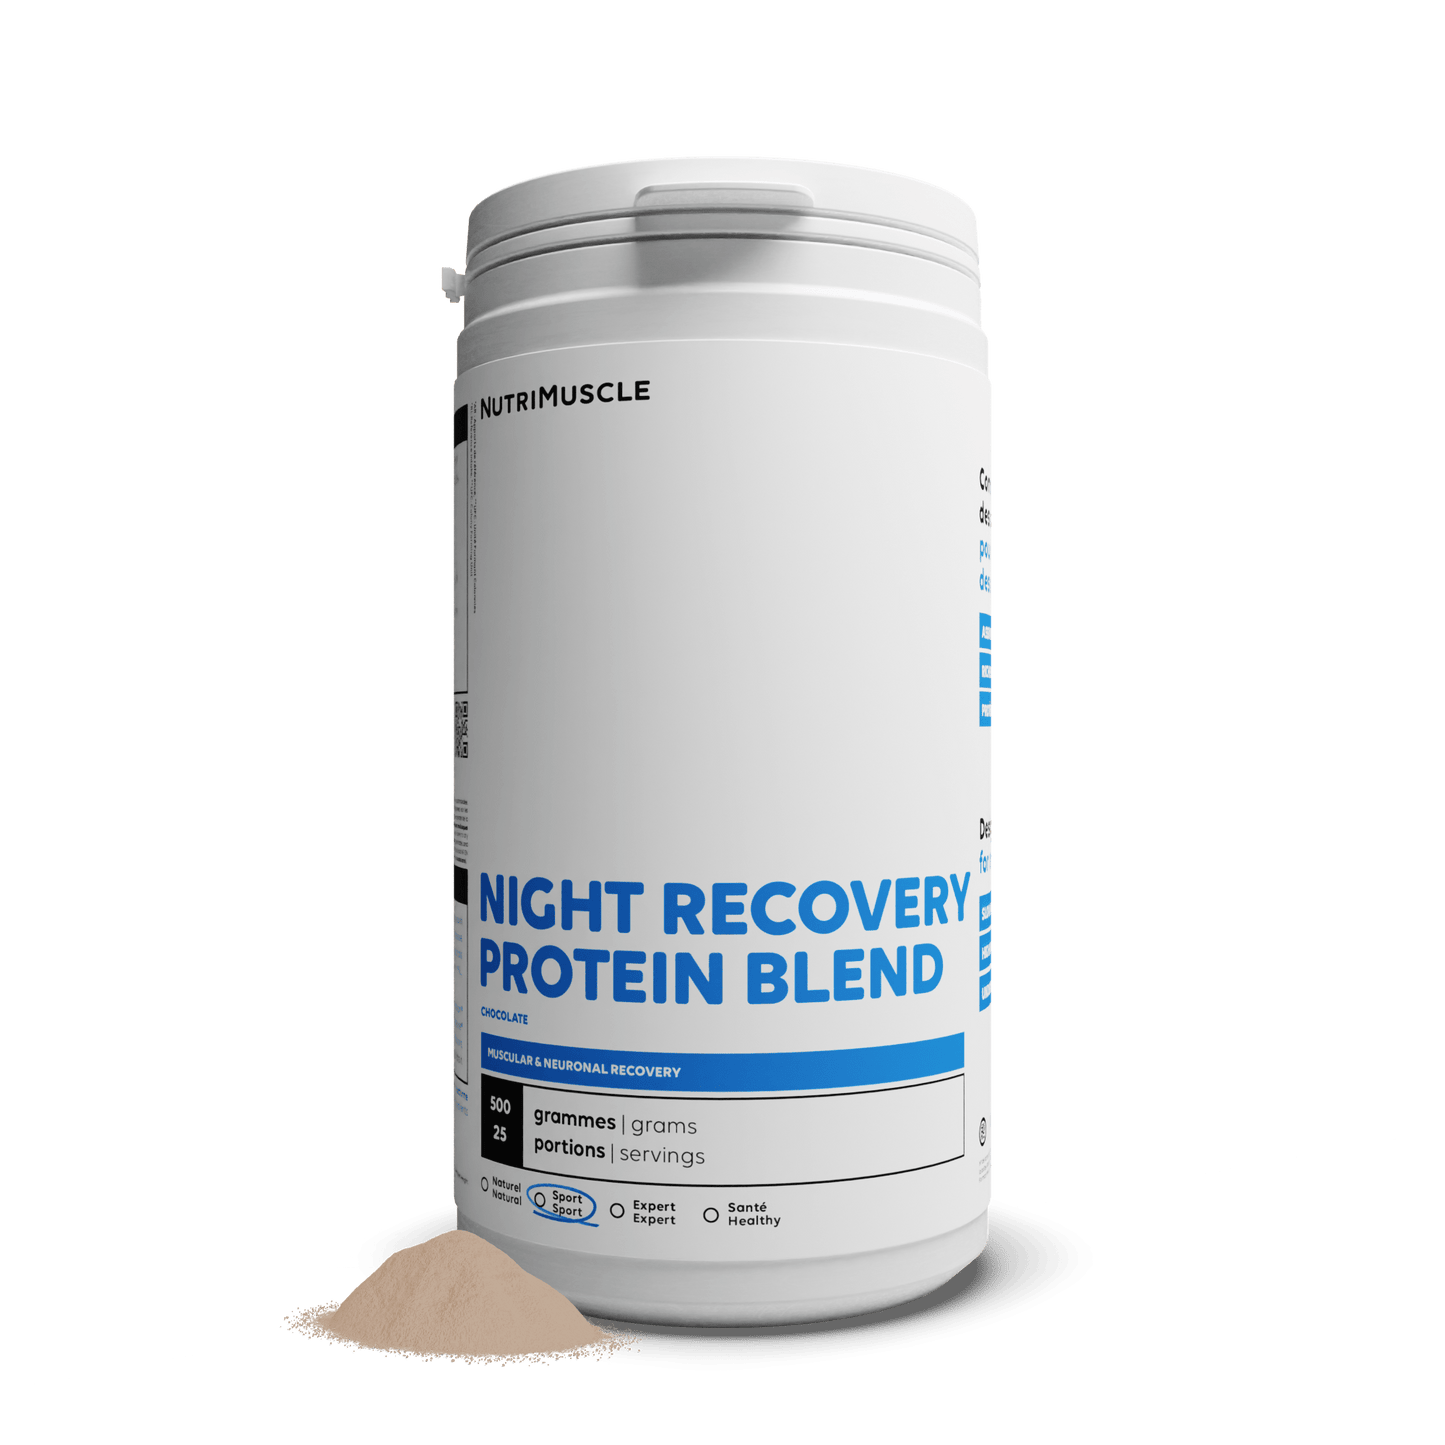 Nutrimuscle Protéines Chocolat / 500 g Night Recovery Protein Blend